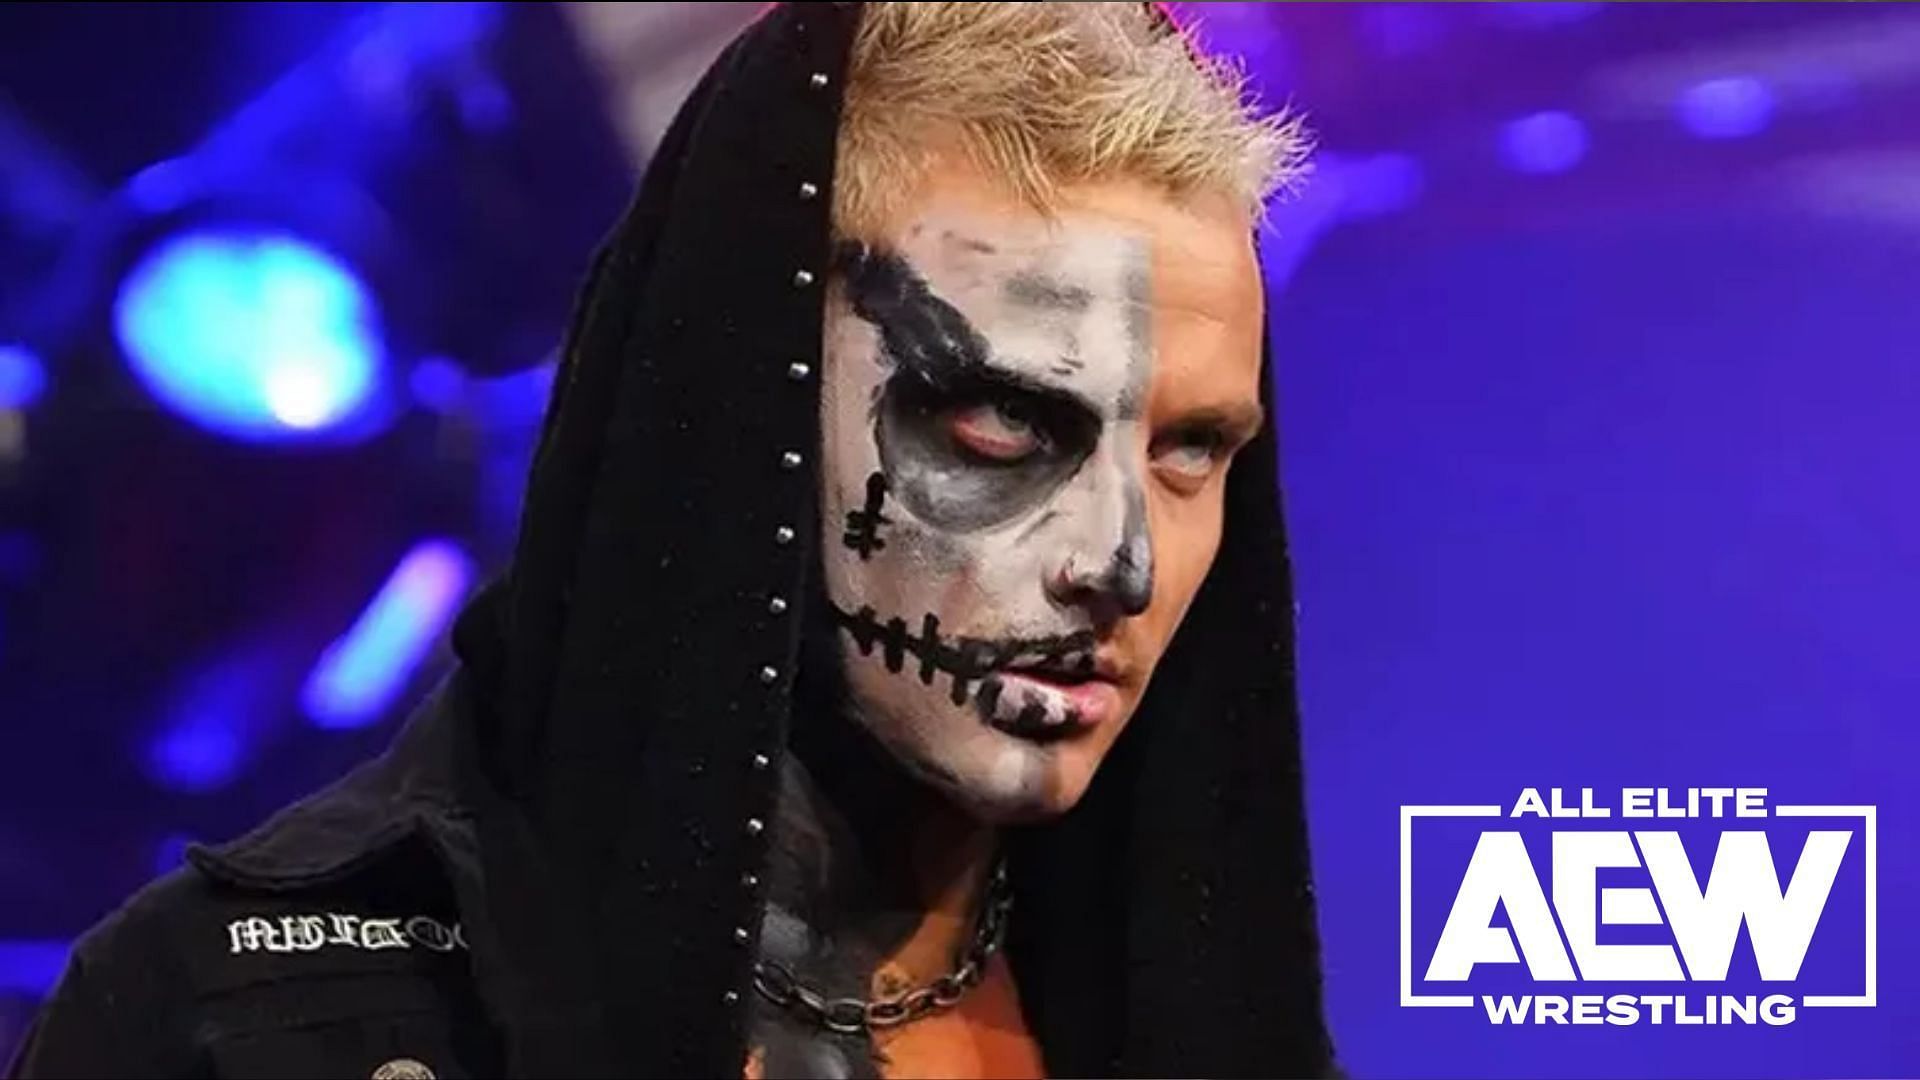 Darby Allin is a two-time TNT Champion in AEW